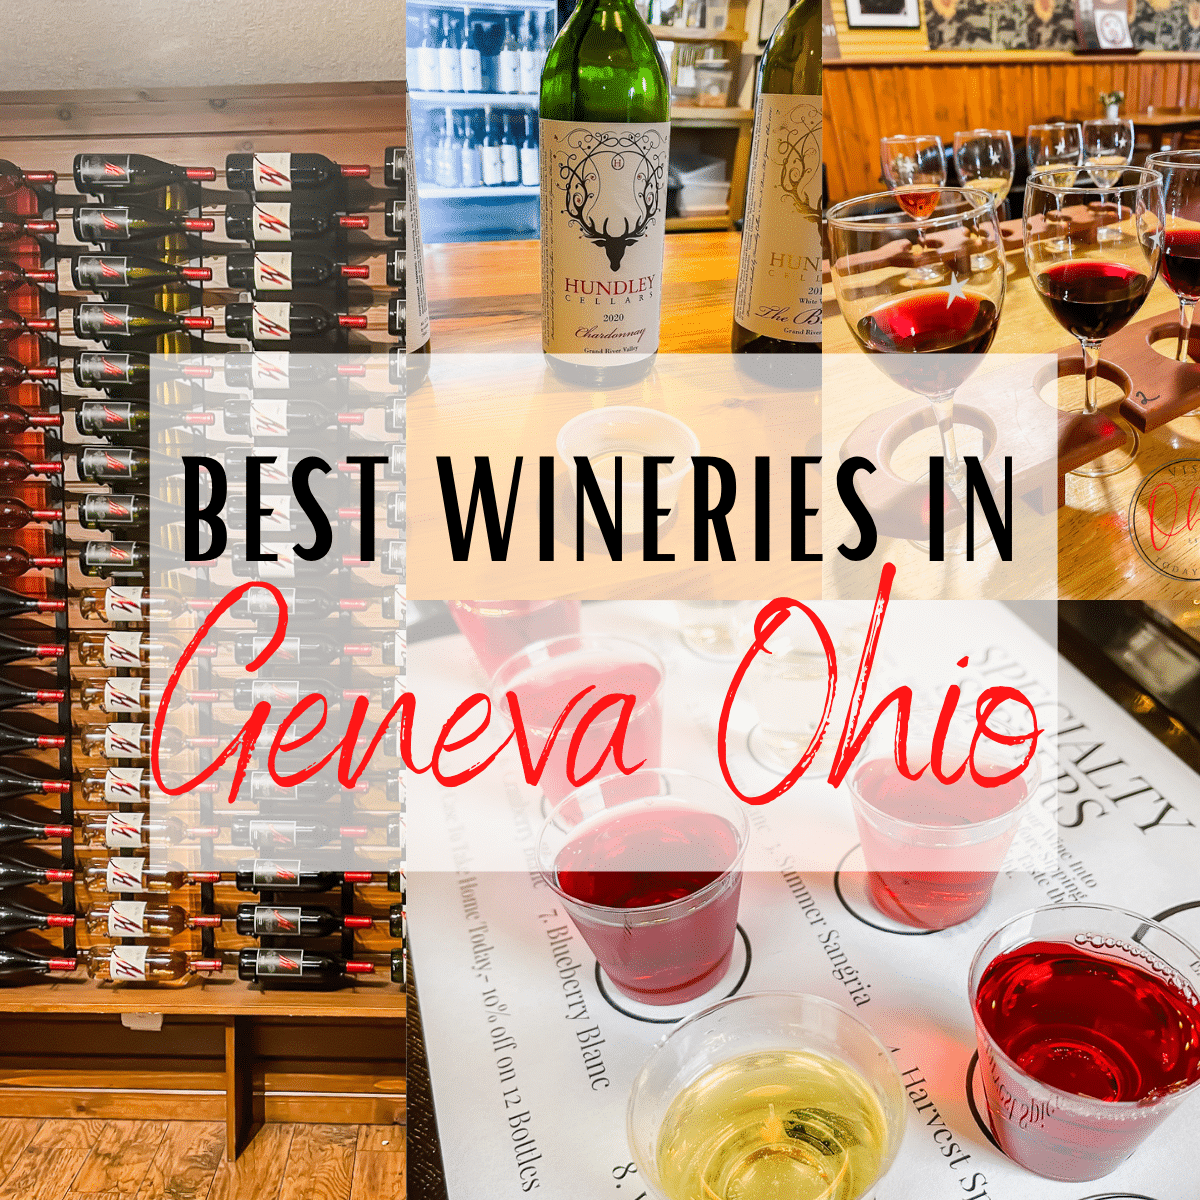 There are over 20+ wineries in Geneva Ohio. Plan a weekend of fun, food and great wine at the wineries in Geneva Ohio! #ohiowine #ohiowineries #genevaohio #AshtabulaCounty